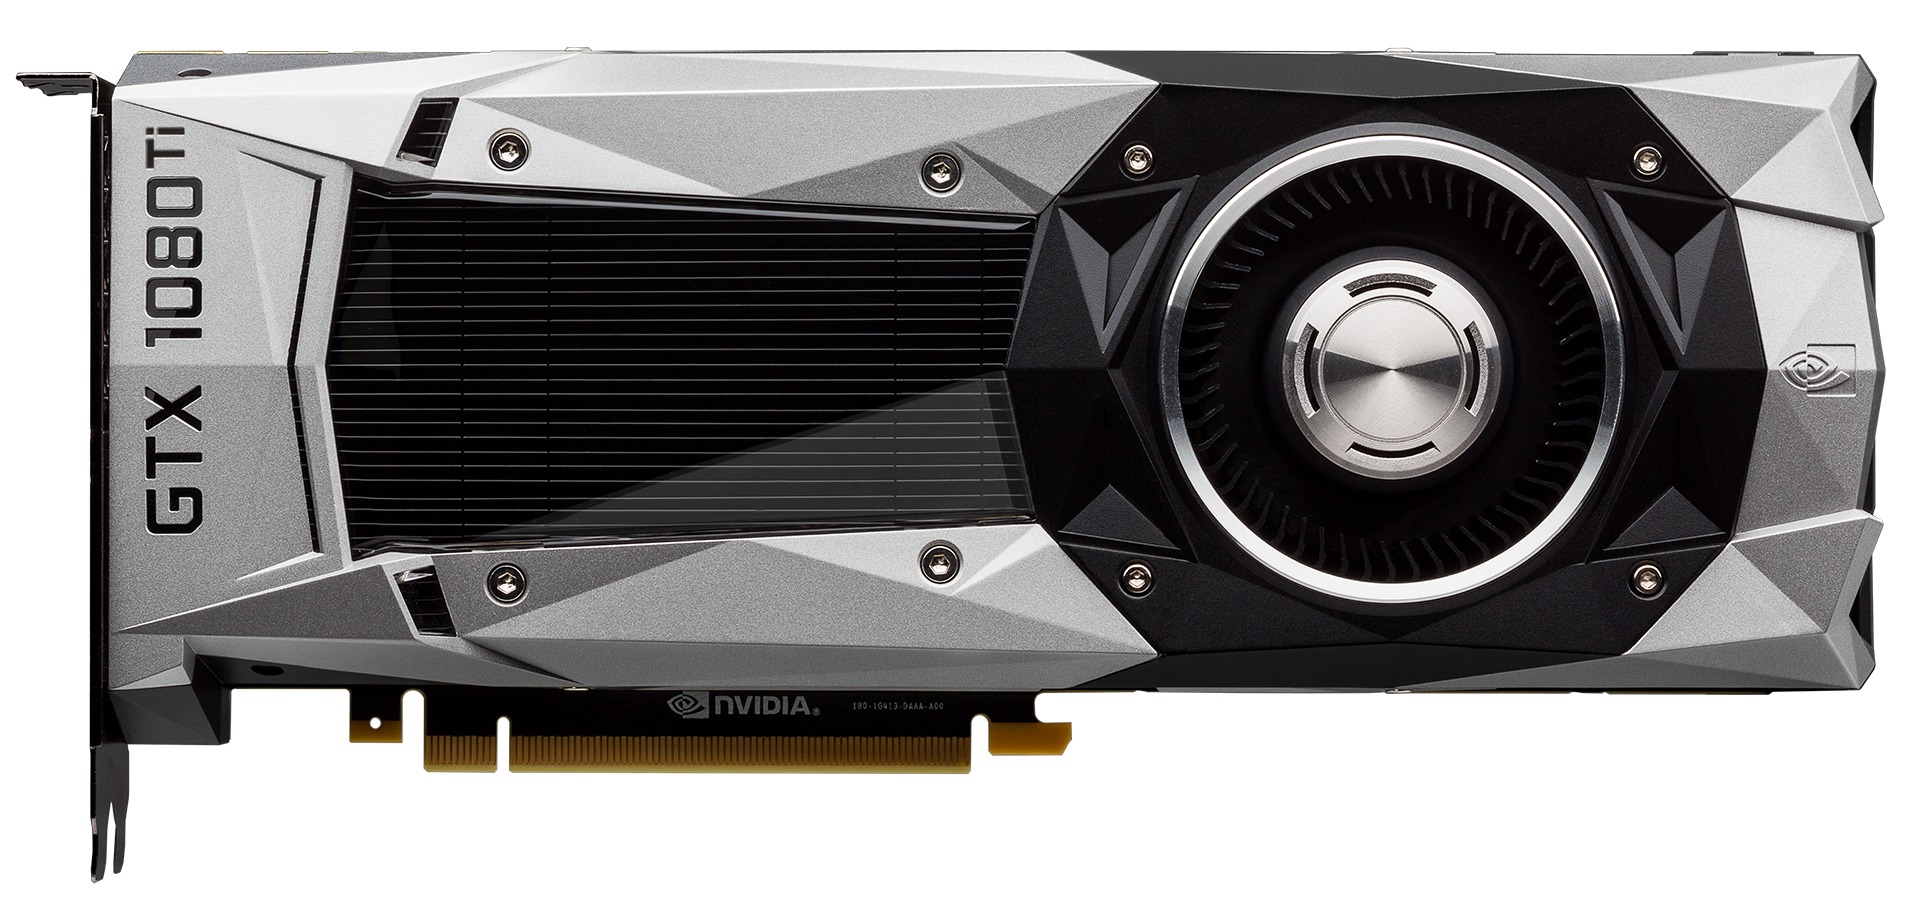 NVIDIA GeForce GTX 1080 Ti Founders Edition with Single Cooling Fan